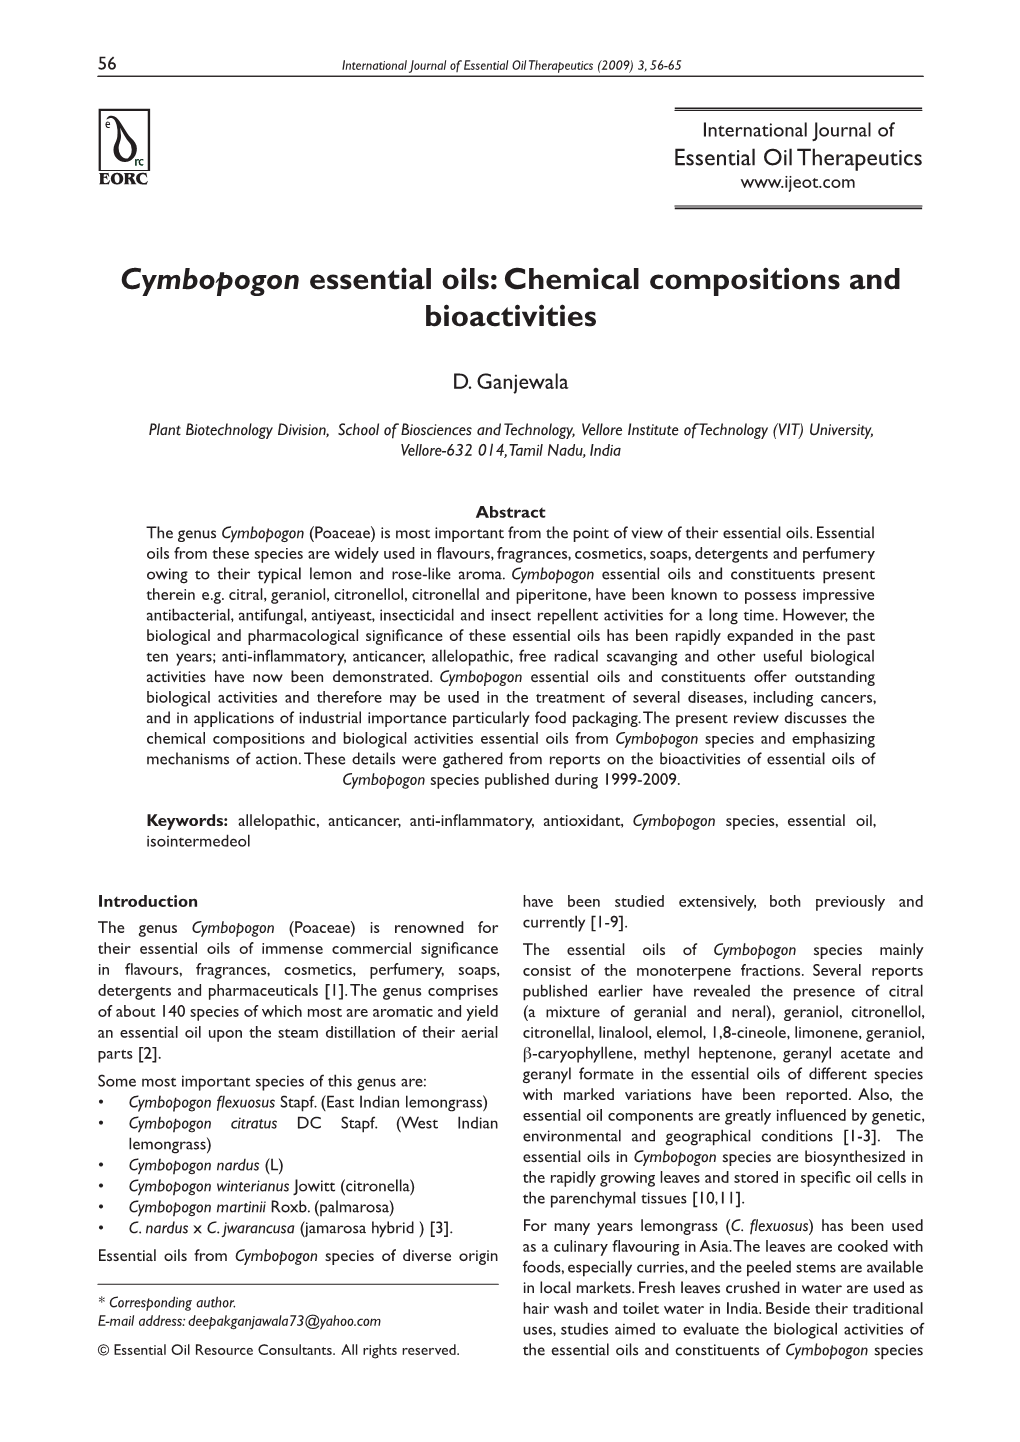 Cymbopogon Essential Oils: Chemical Compositions and Bioactivities